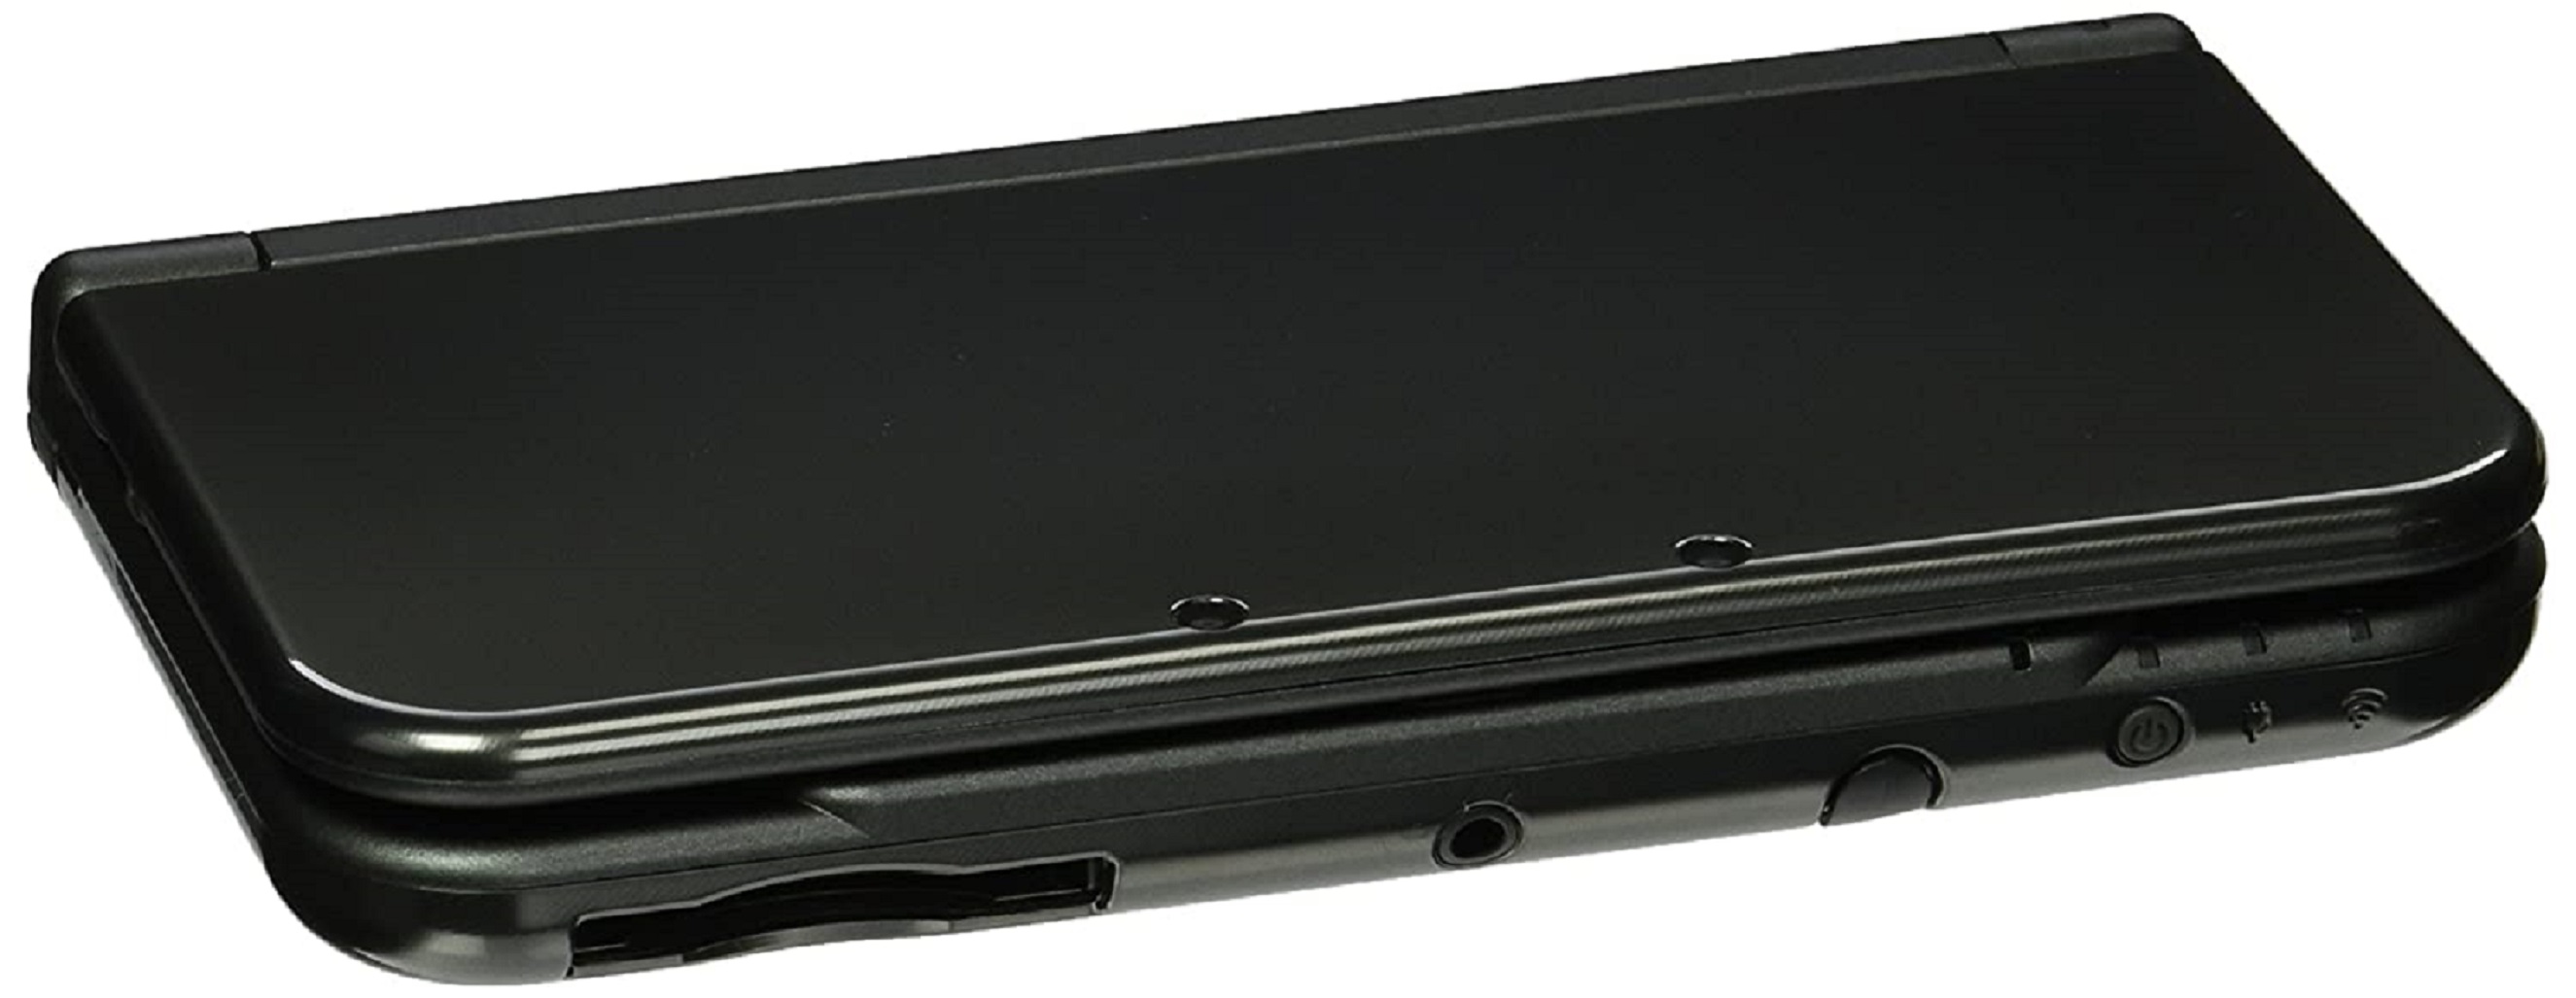 3DS XL System - image 4 of 5